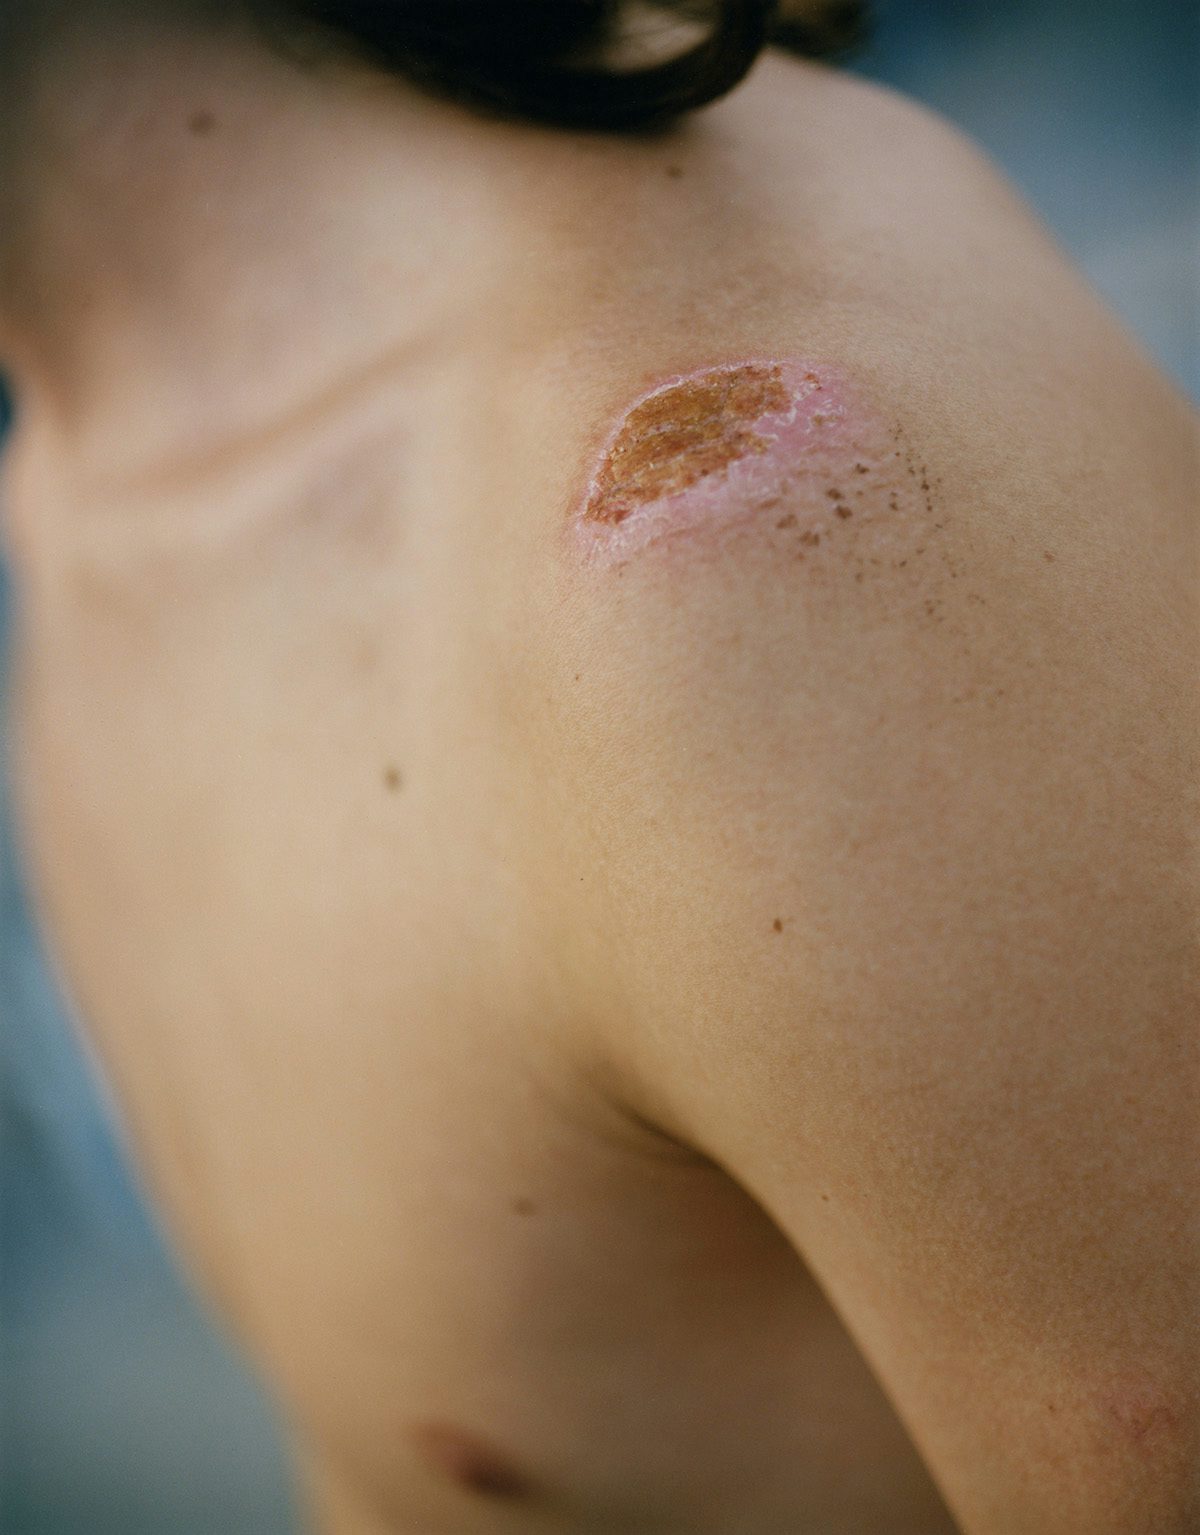 Close-up of a graze on a person's shoulder